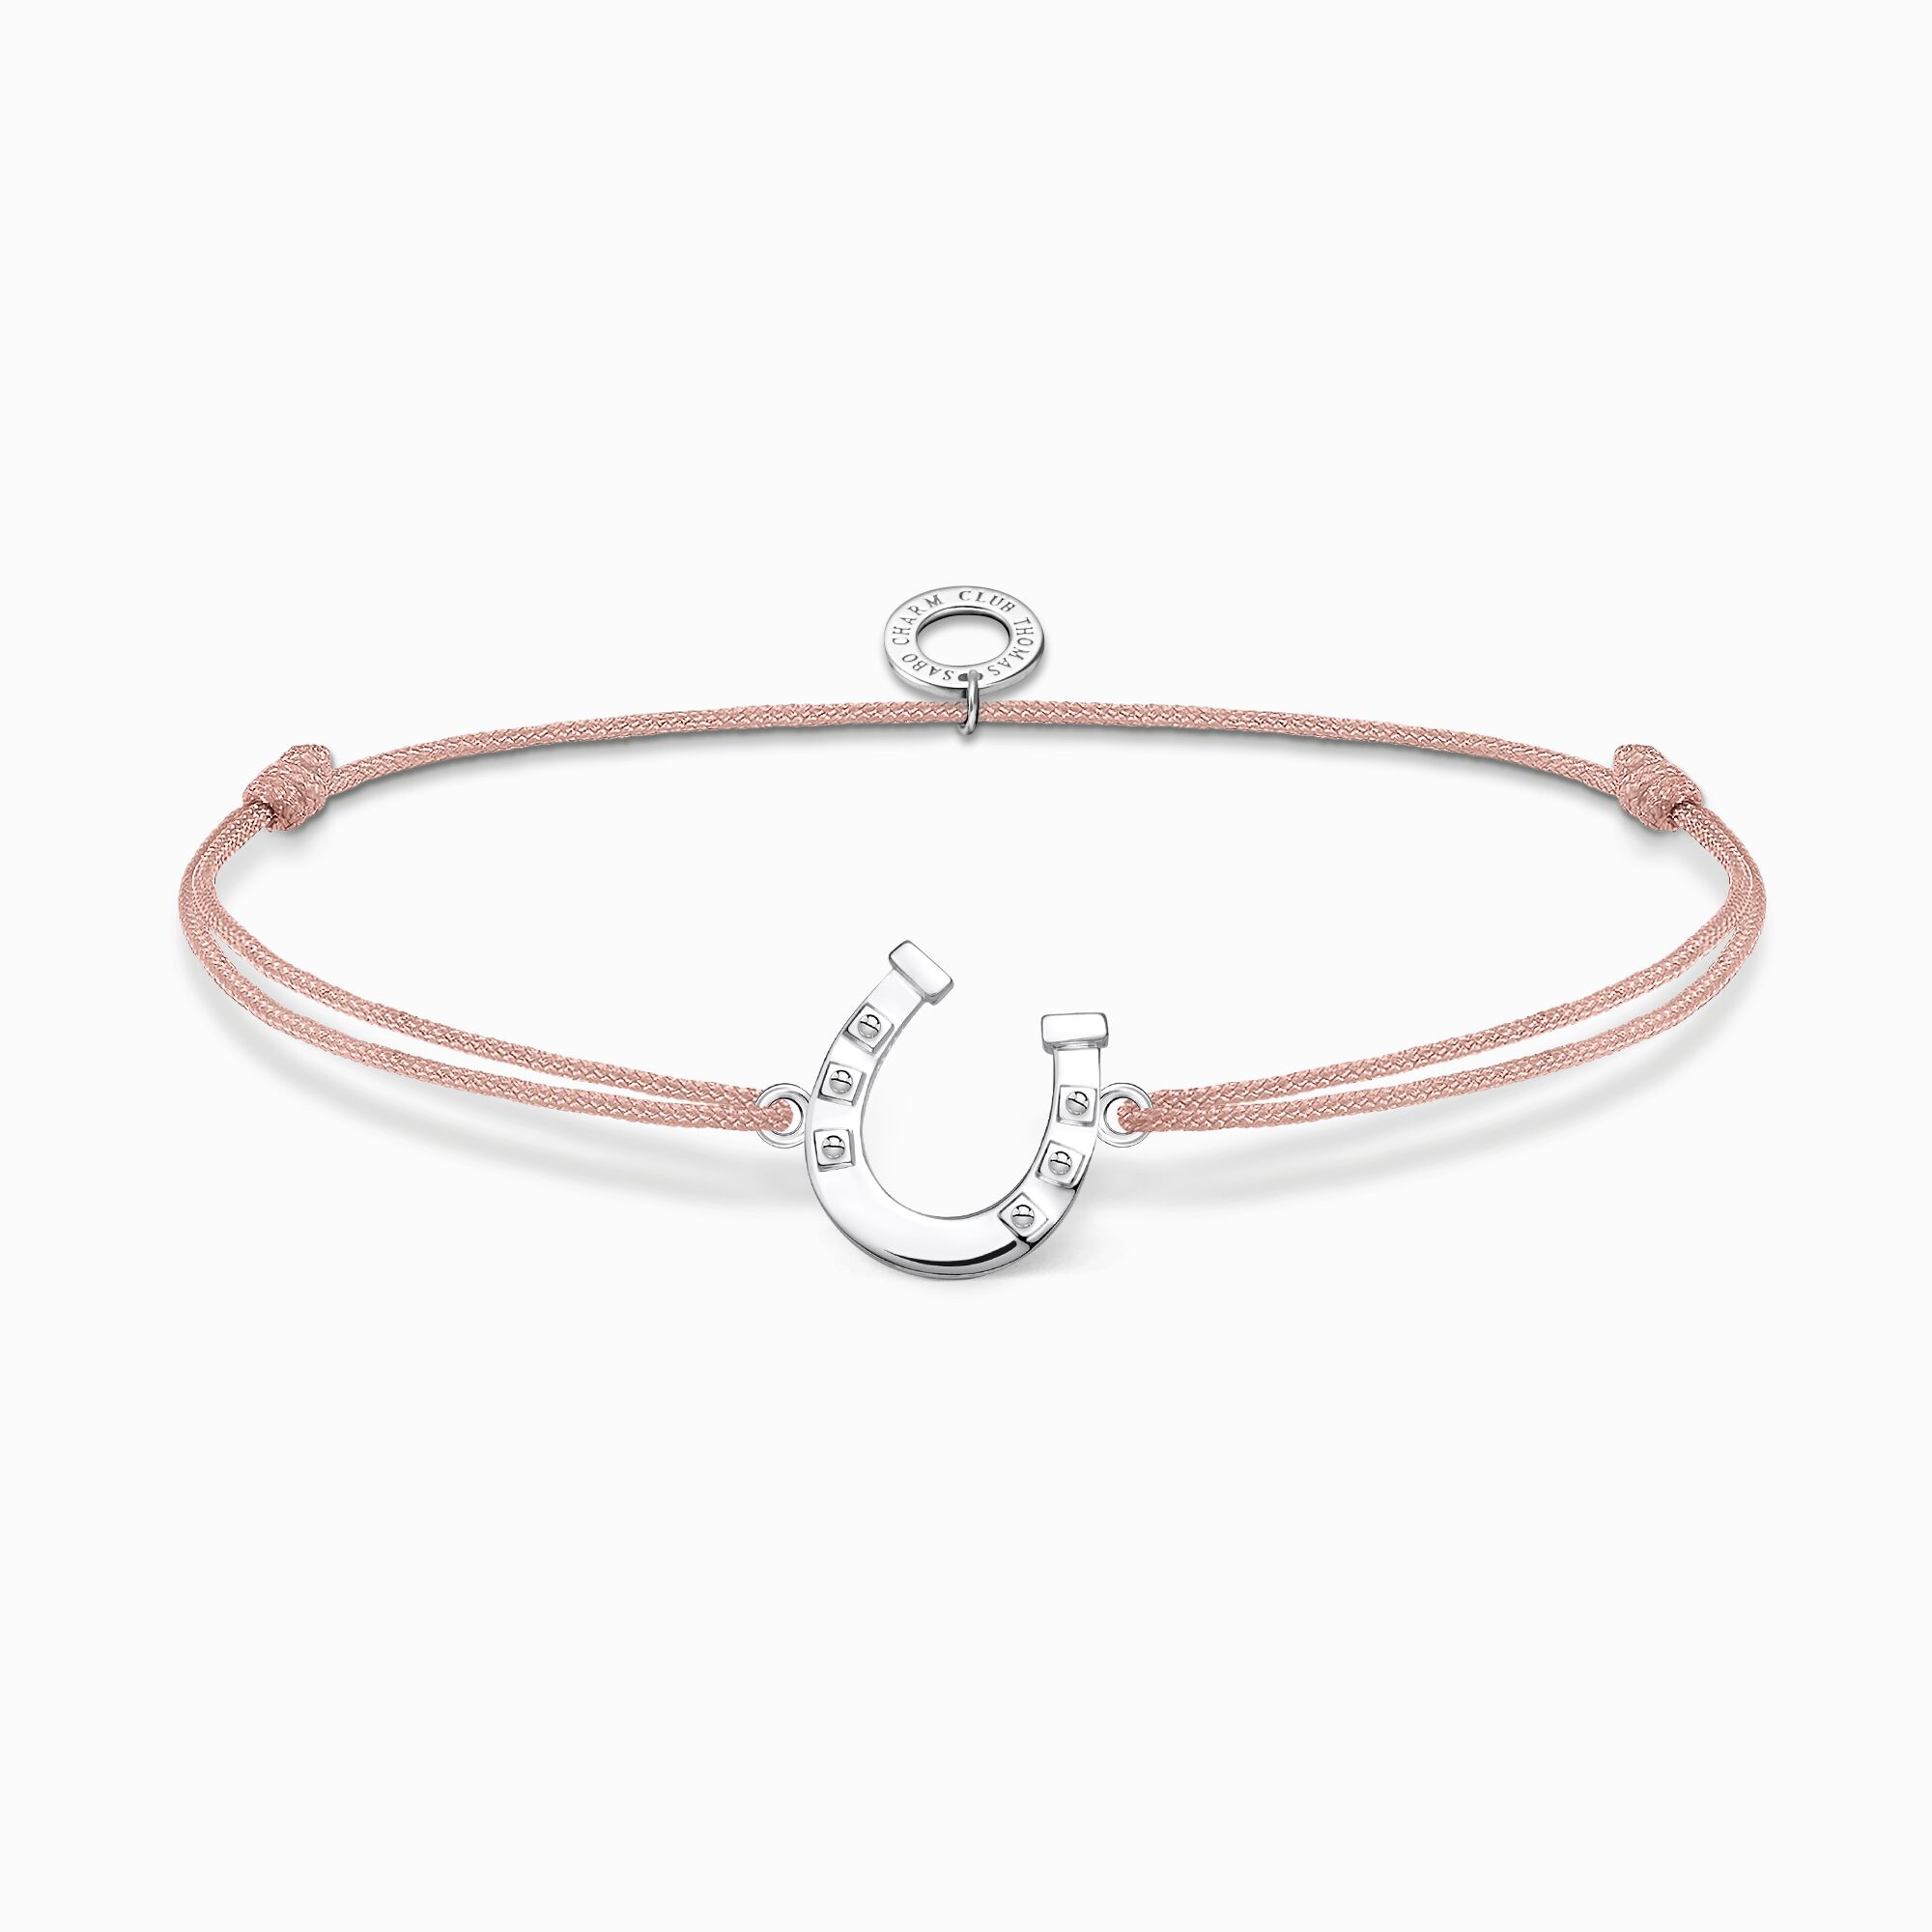 Bracelet Little Secret horseshoe from the Charming Collection collection in the THOMAS SABO online store